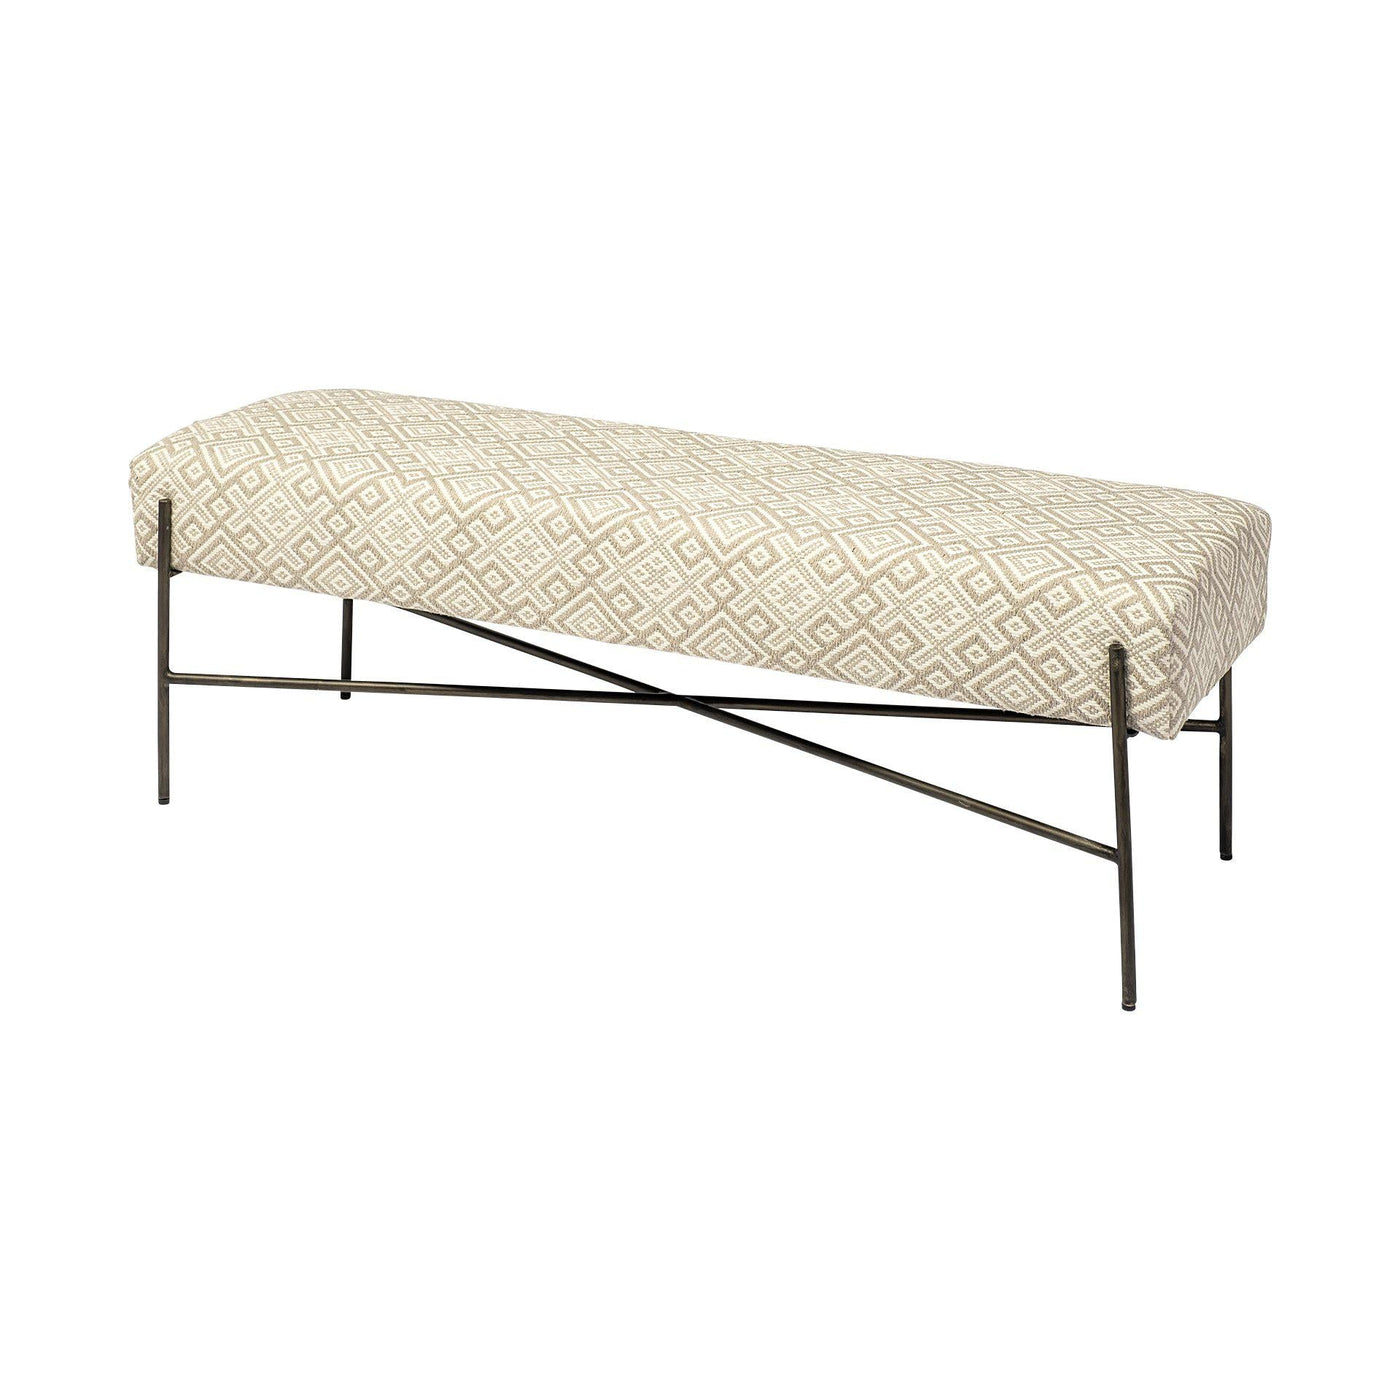 Avery II Upholstered Seat With Accent Bench